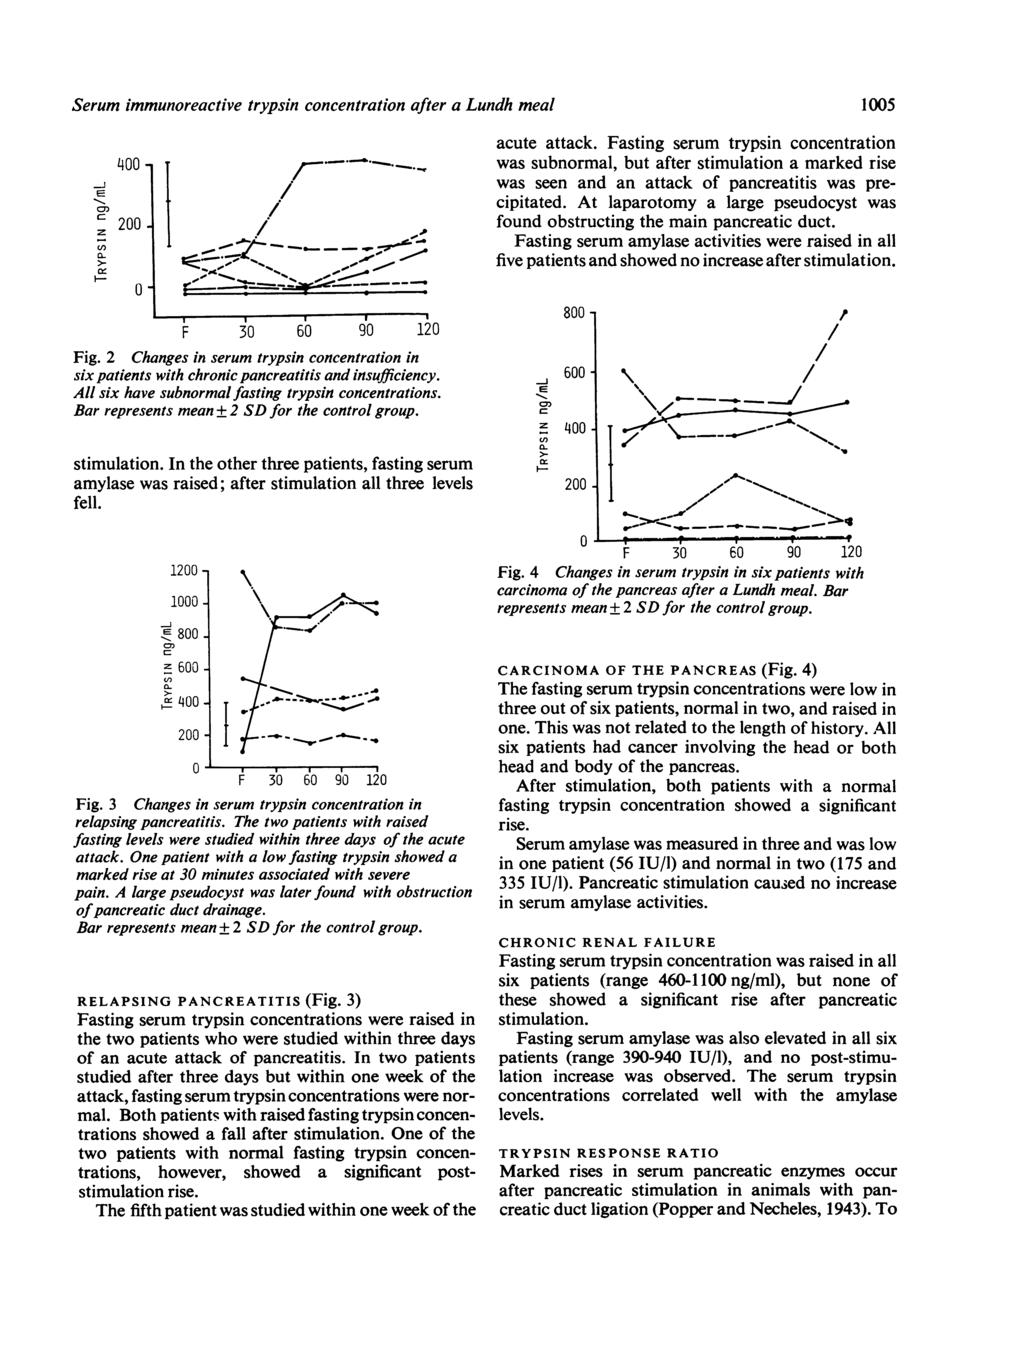 Serum immunoreactive trypsin concentration after a Lundh meal 400 z 200 0n 0- F 30 60 90 120 Fig. 2 Changes in serum trypsin concentration in six patients with chronic pancreatitis and insufficiency.